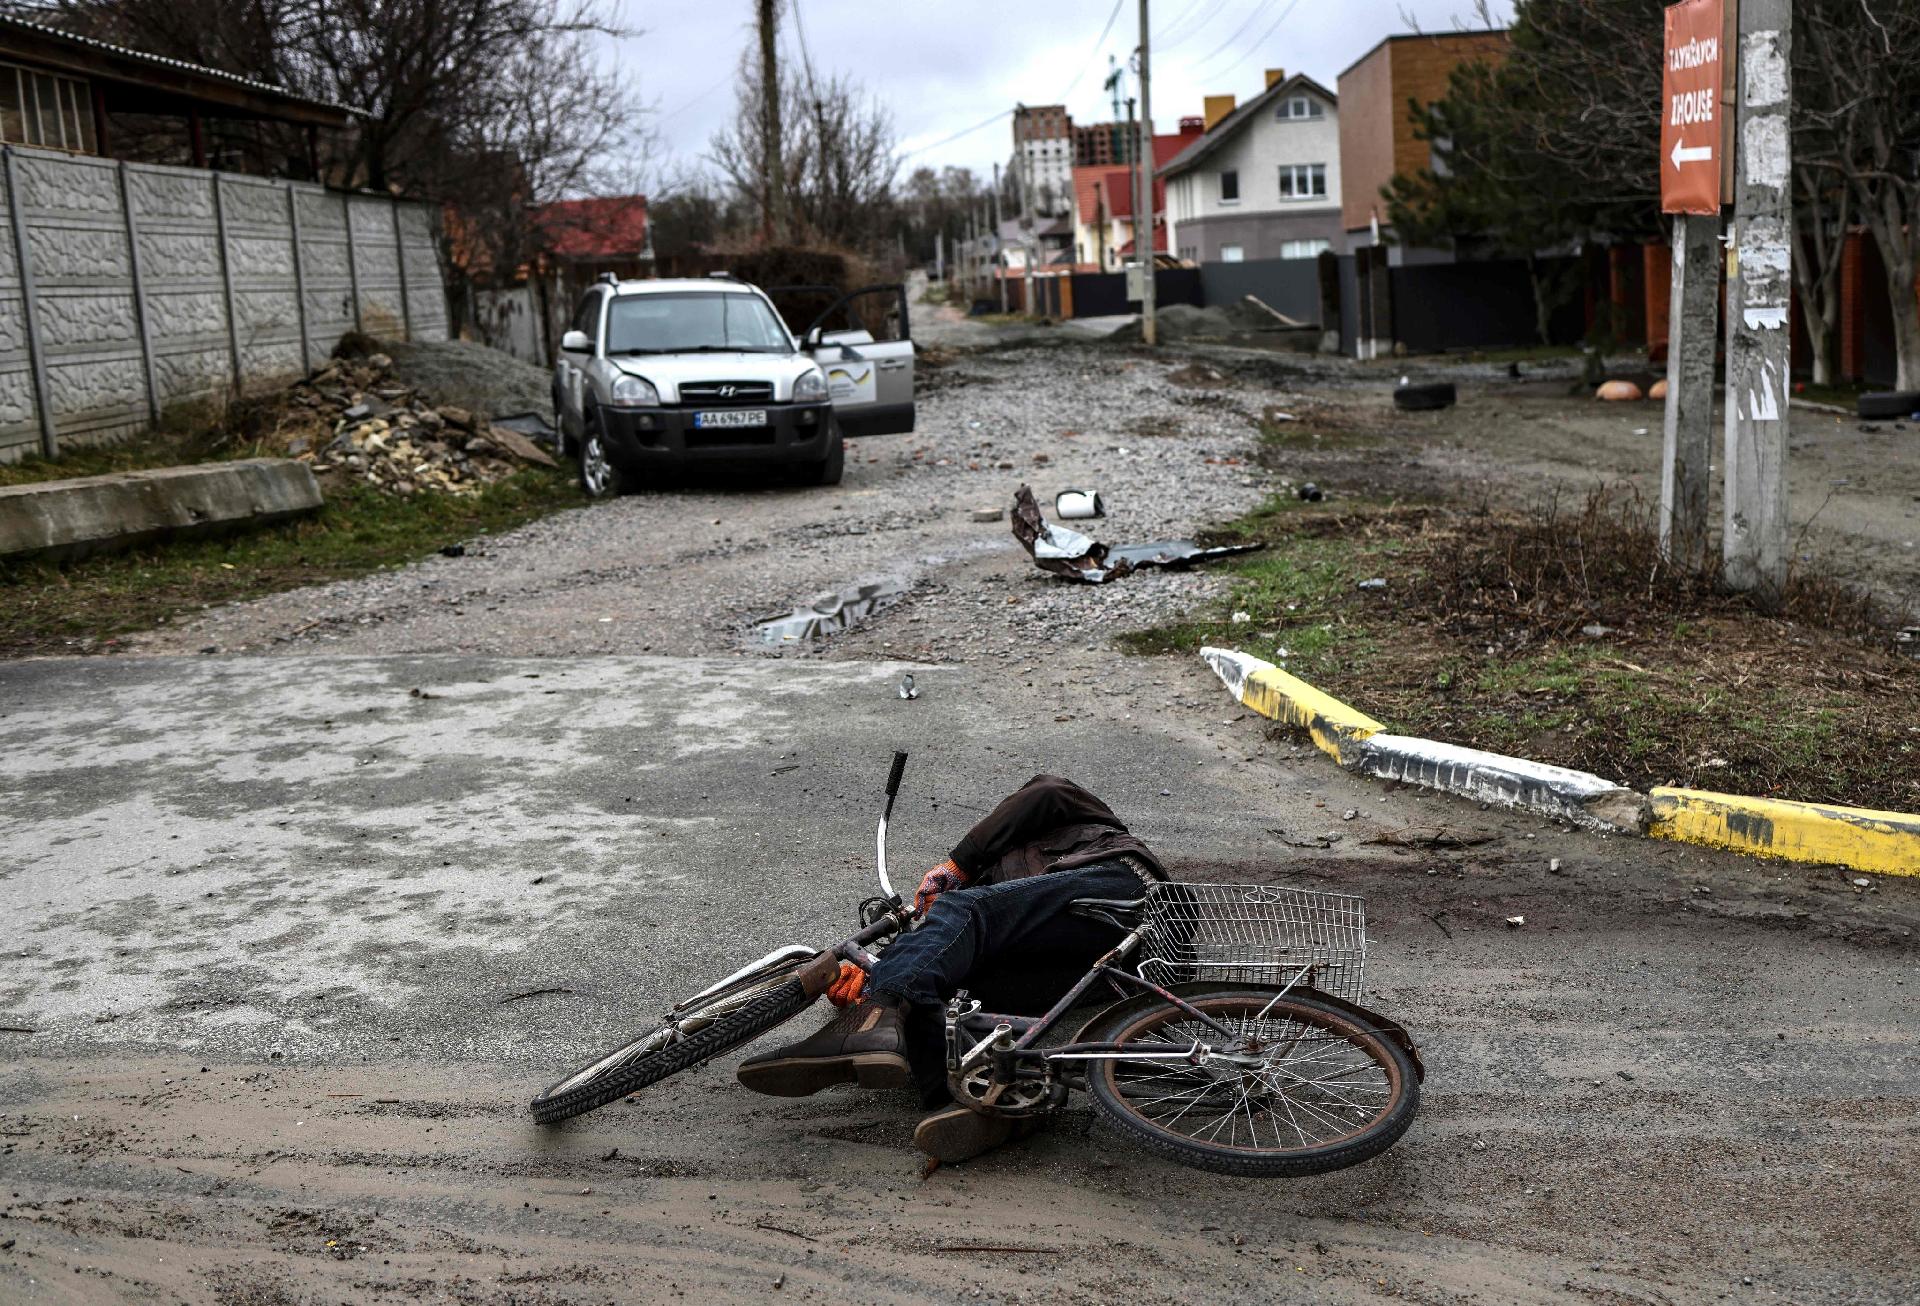 April 2, 2022 - Ukrainian forces retrieved the bodies of at least 20 people in plain clothes today in the city of Bucha, northwest of Kiev - Ronaldo Schemidt/AFP